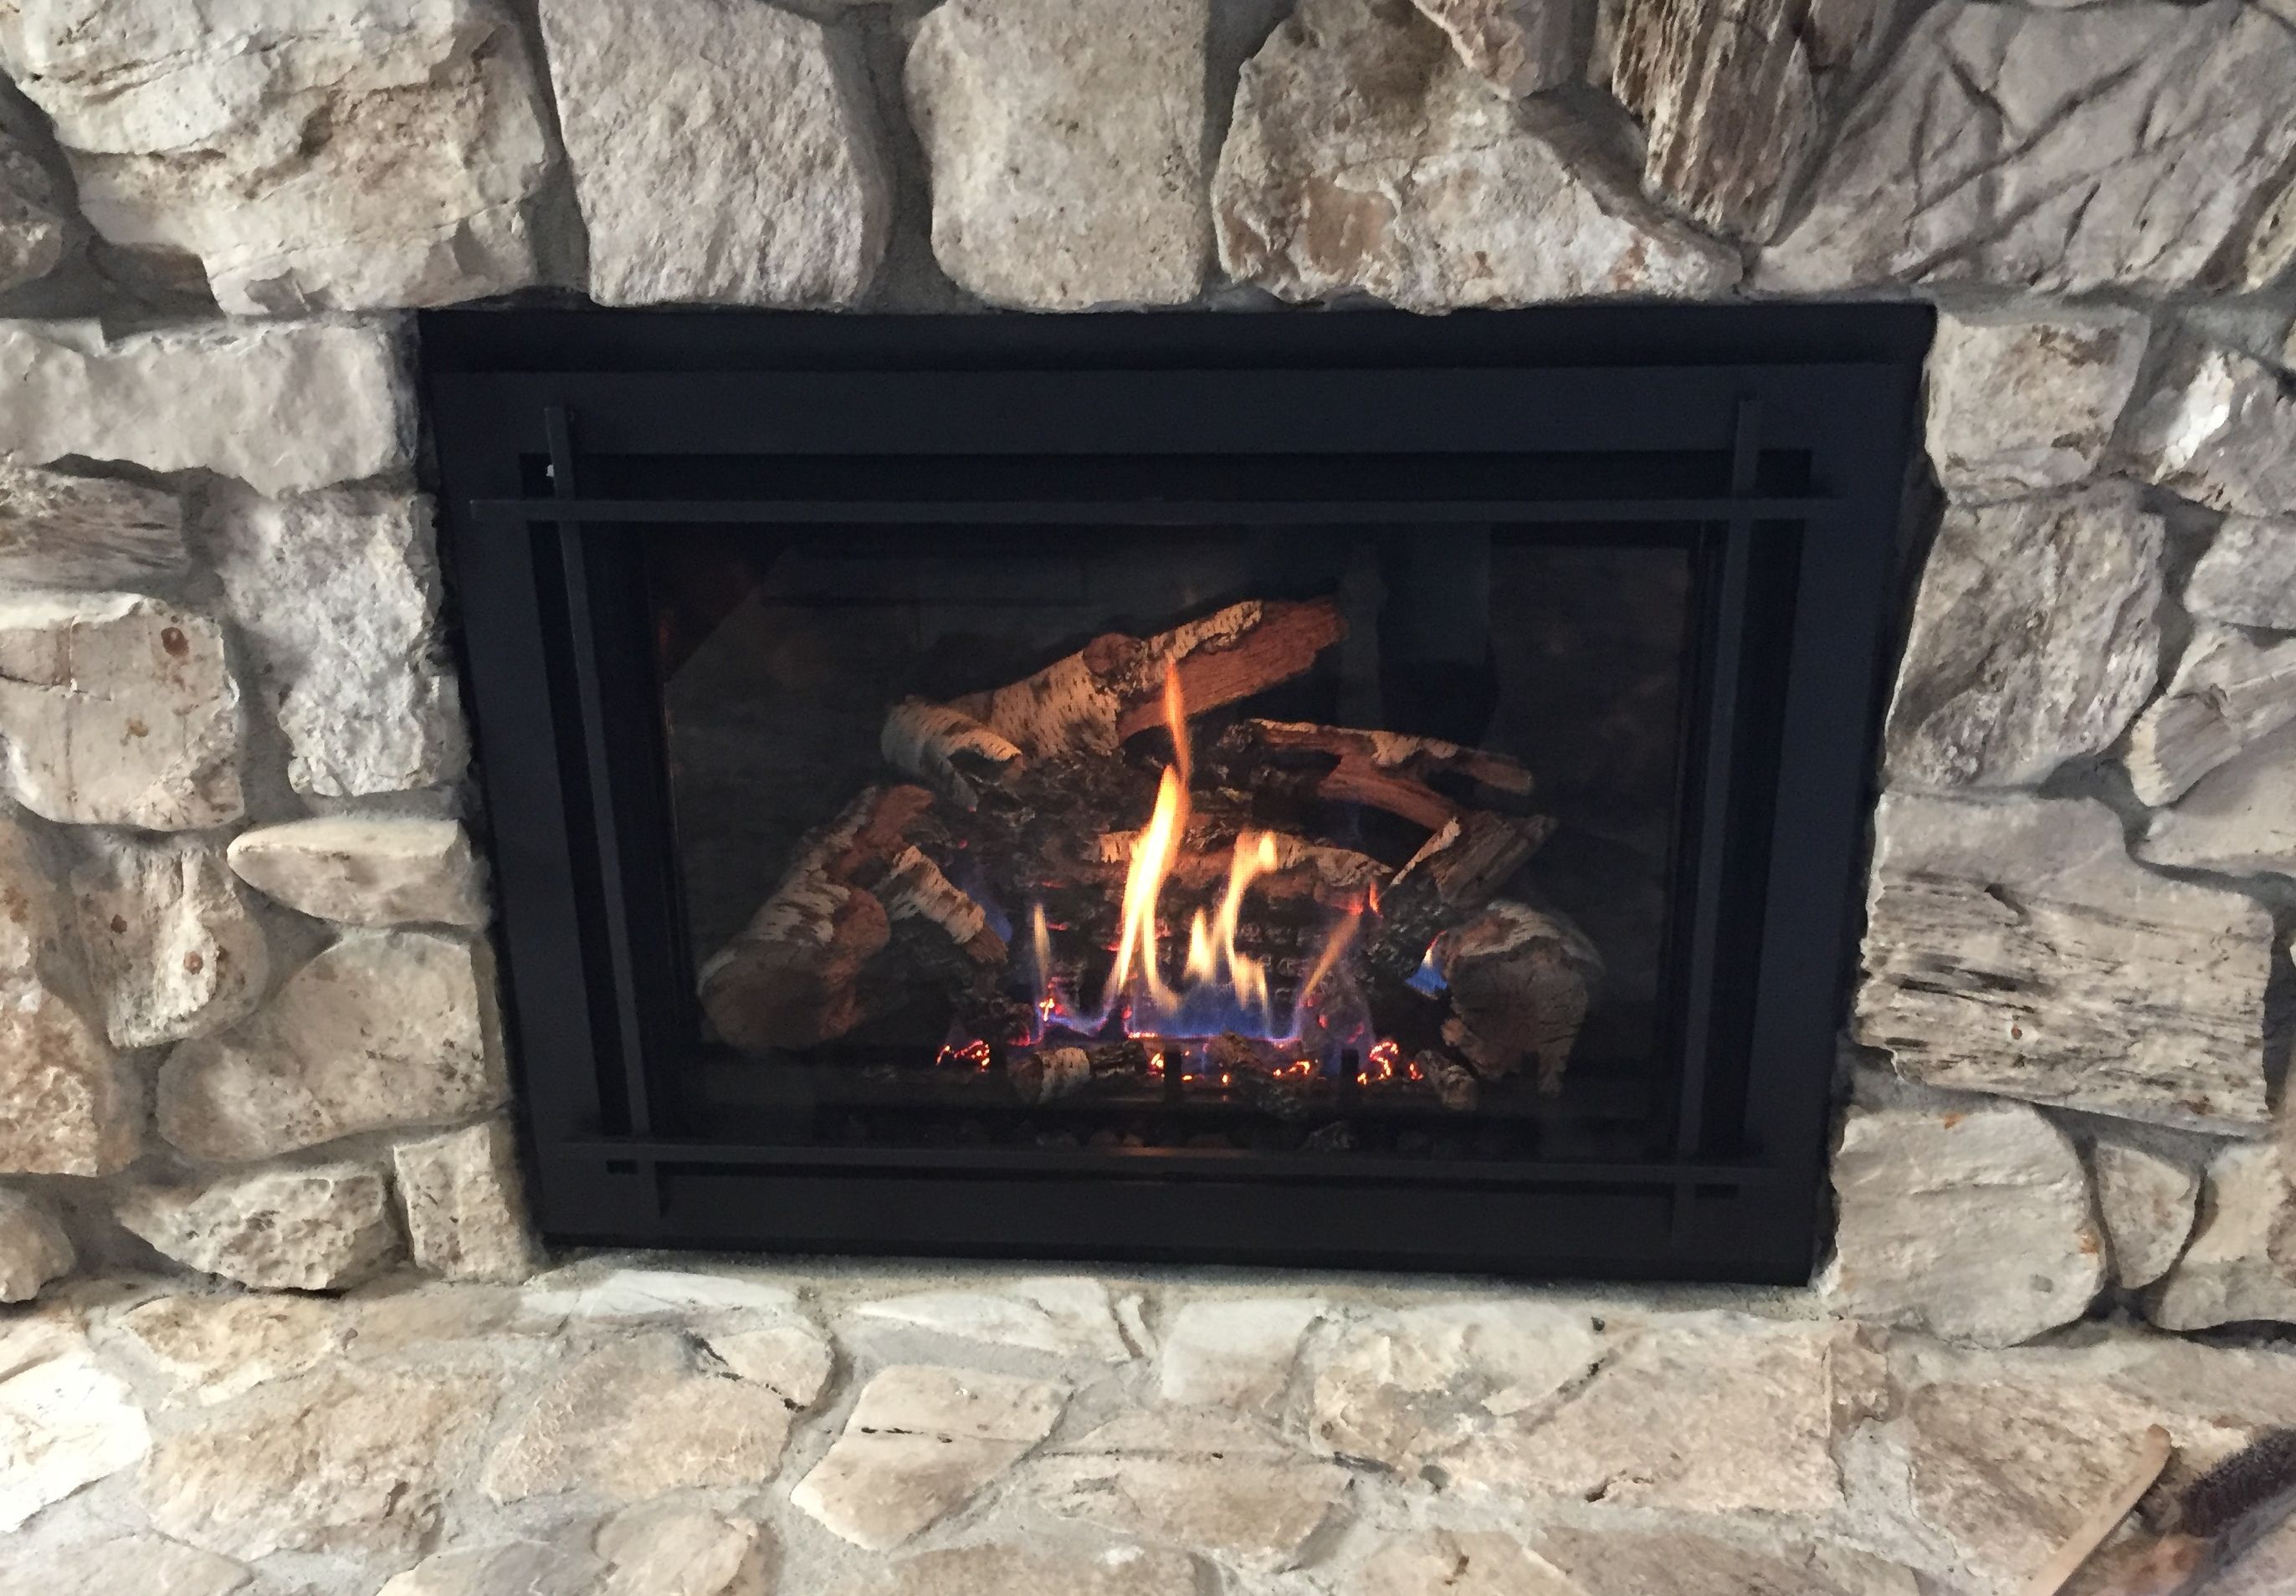 A living room fireplace insert installed by Pacific Hearth & Home in Rancho Cordova, CA